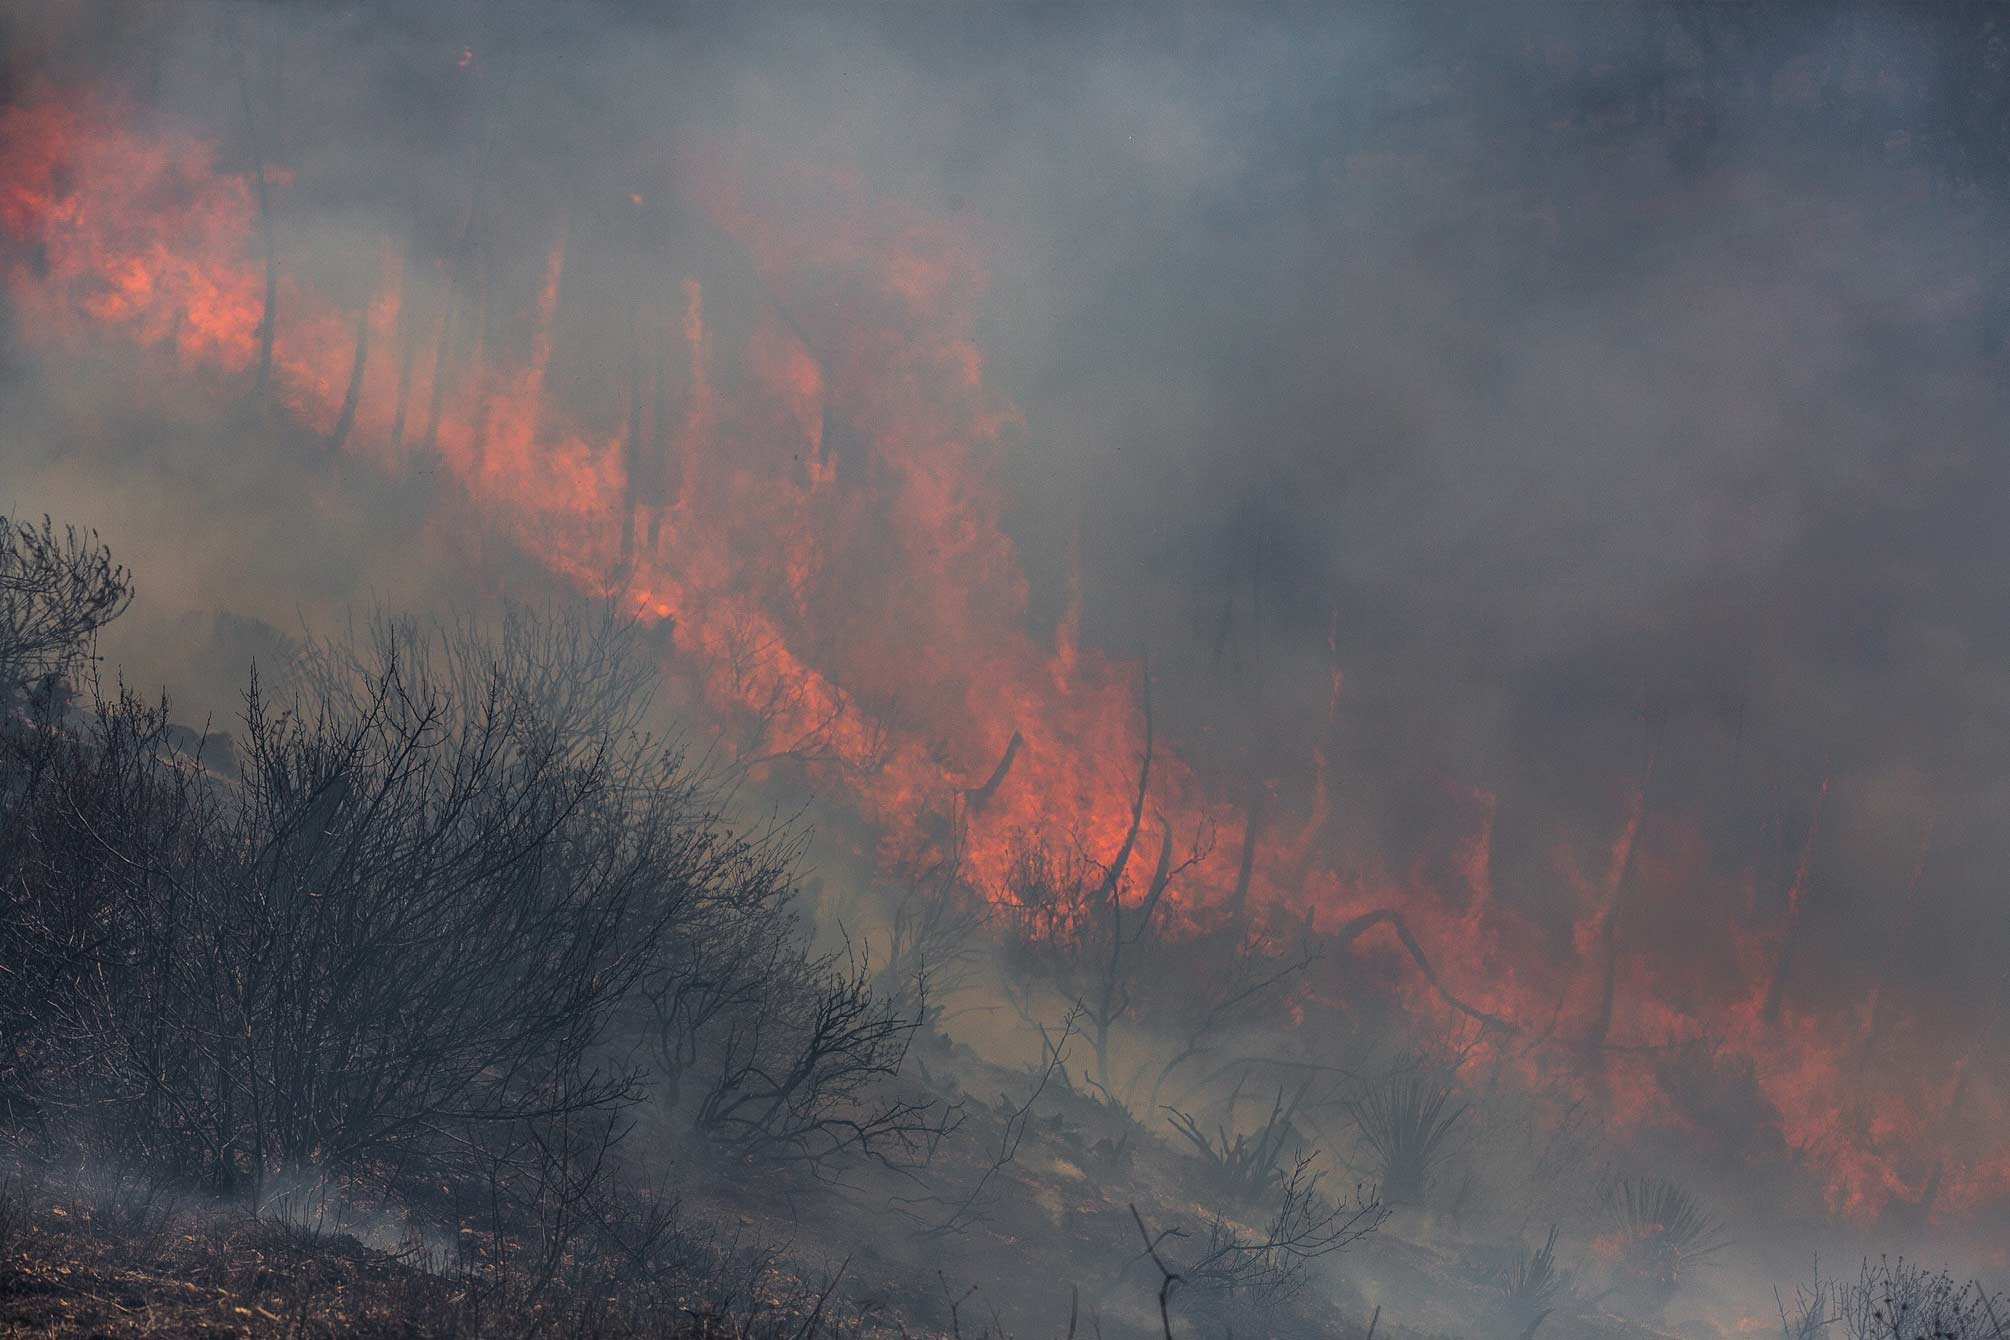 A closeup photo of flames engulfing the hillside, obscured by smoke.